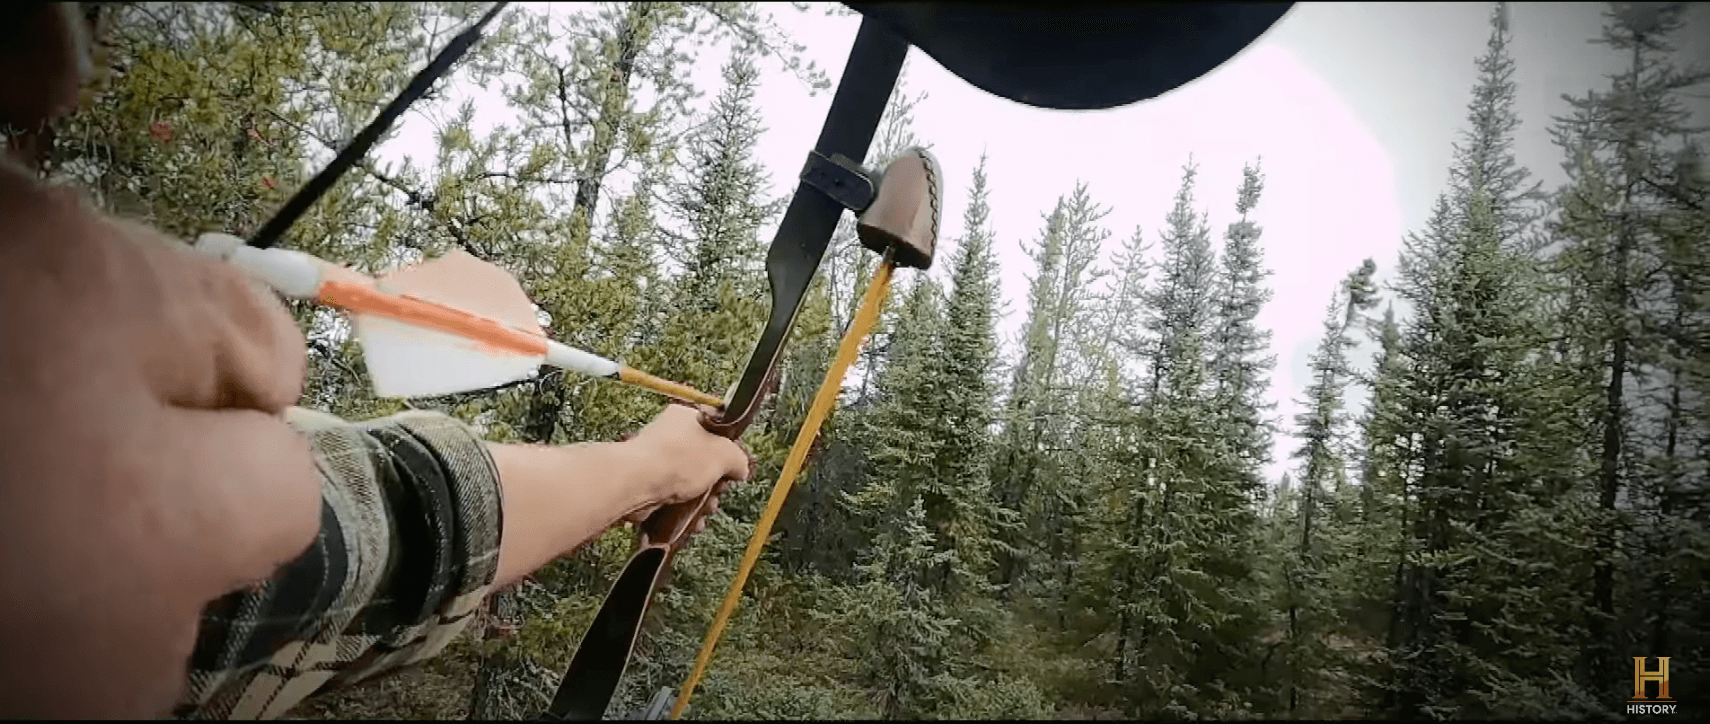 A competitor pulling back a bow and arrow, one of his specialty items, in 'Alone' Season 10